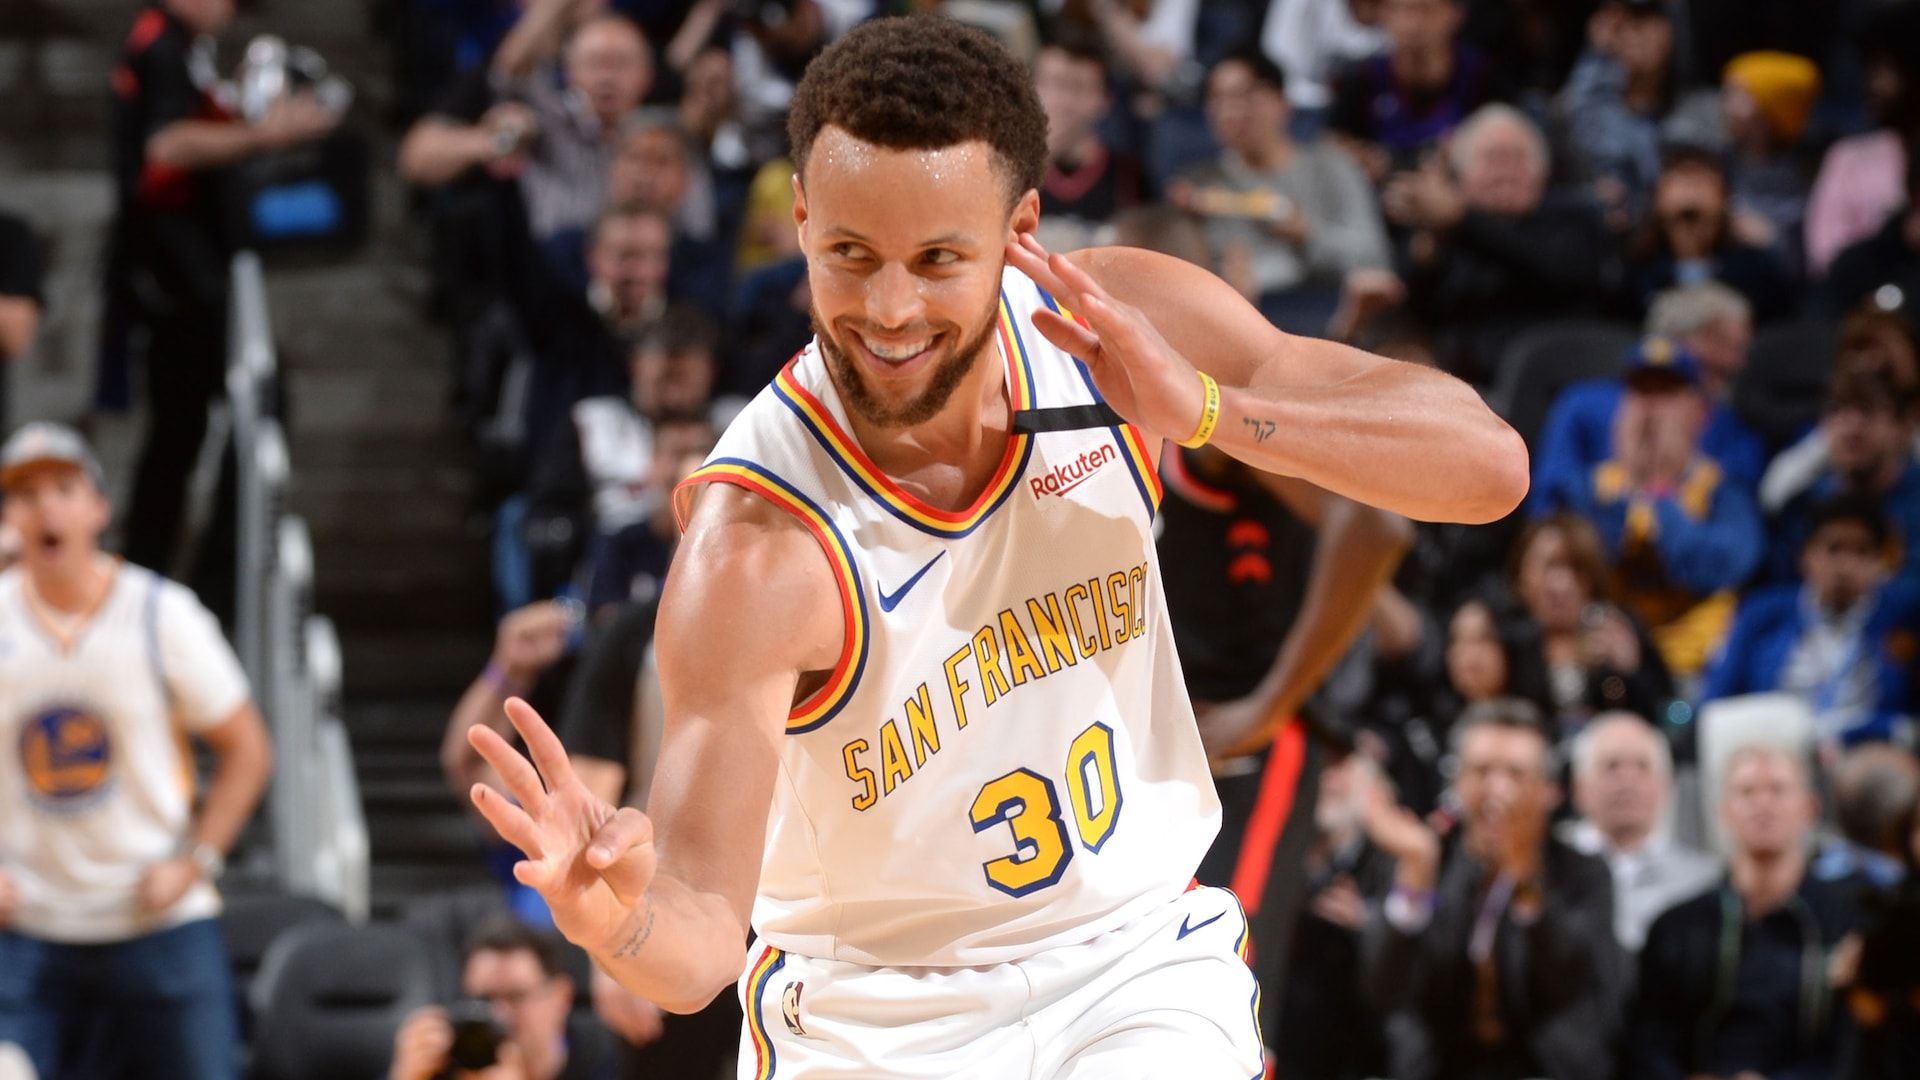 Stephen Curry electrifies crowd in return to Golden State